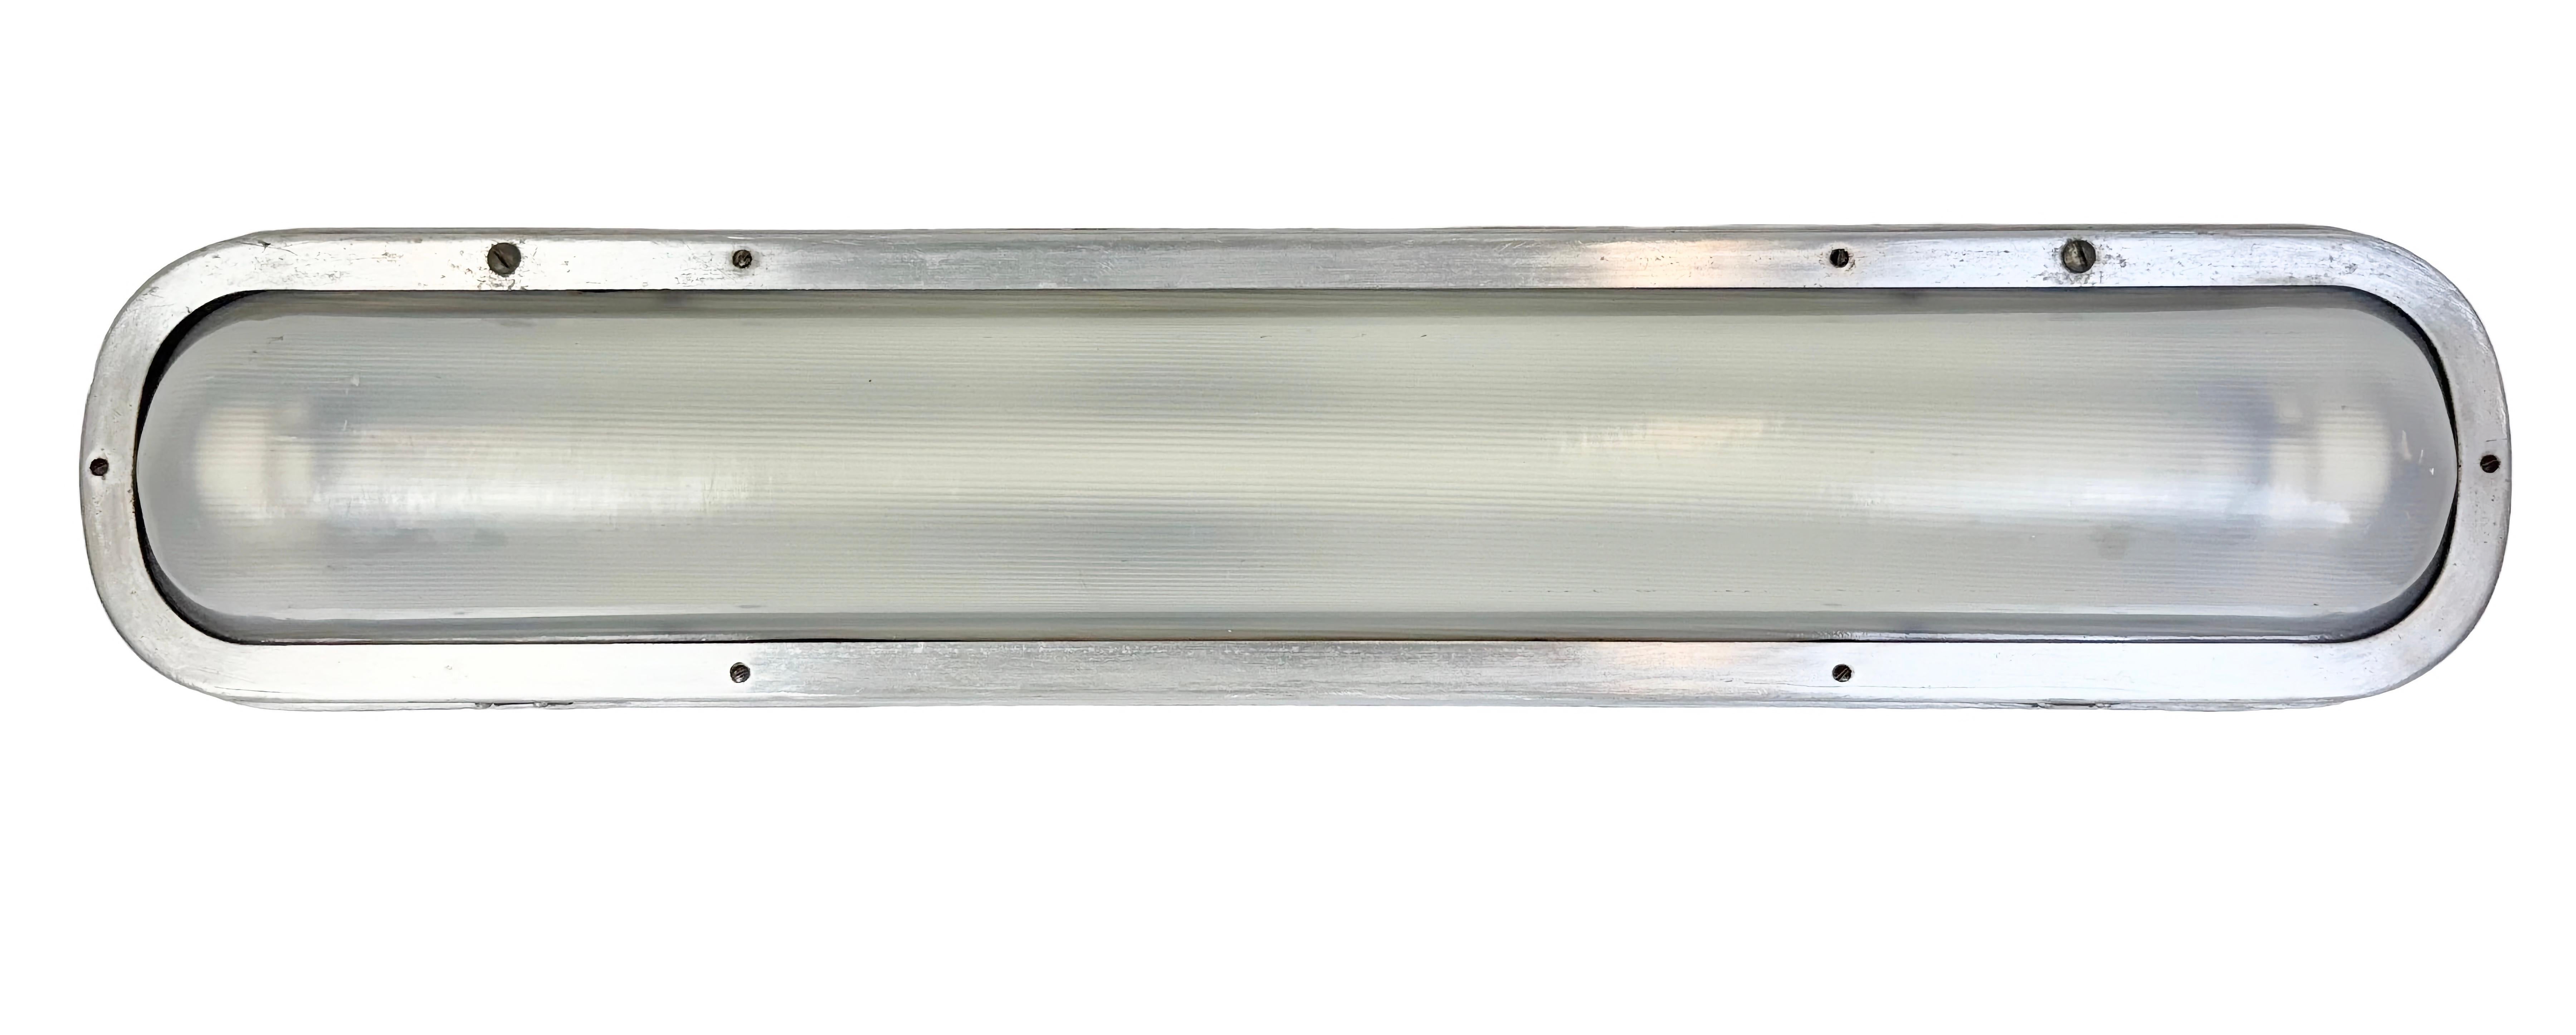 This industrial tube light was made in former Czechoslovakia during the 1970s. These lights were used in Czechoslovak trains called “PANTOGRAF” It is made of an aluminium and a plastic glass The light is converted into one Led T8, 60 cm light tube.